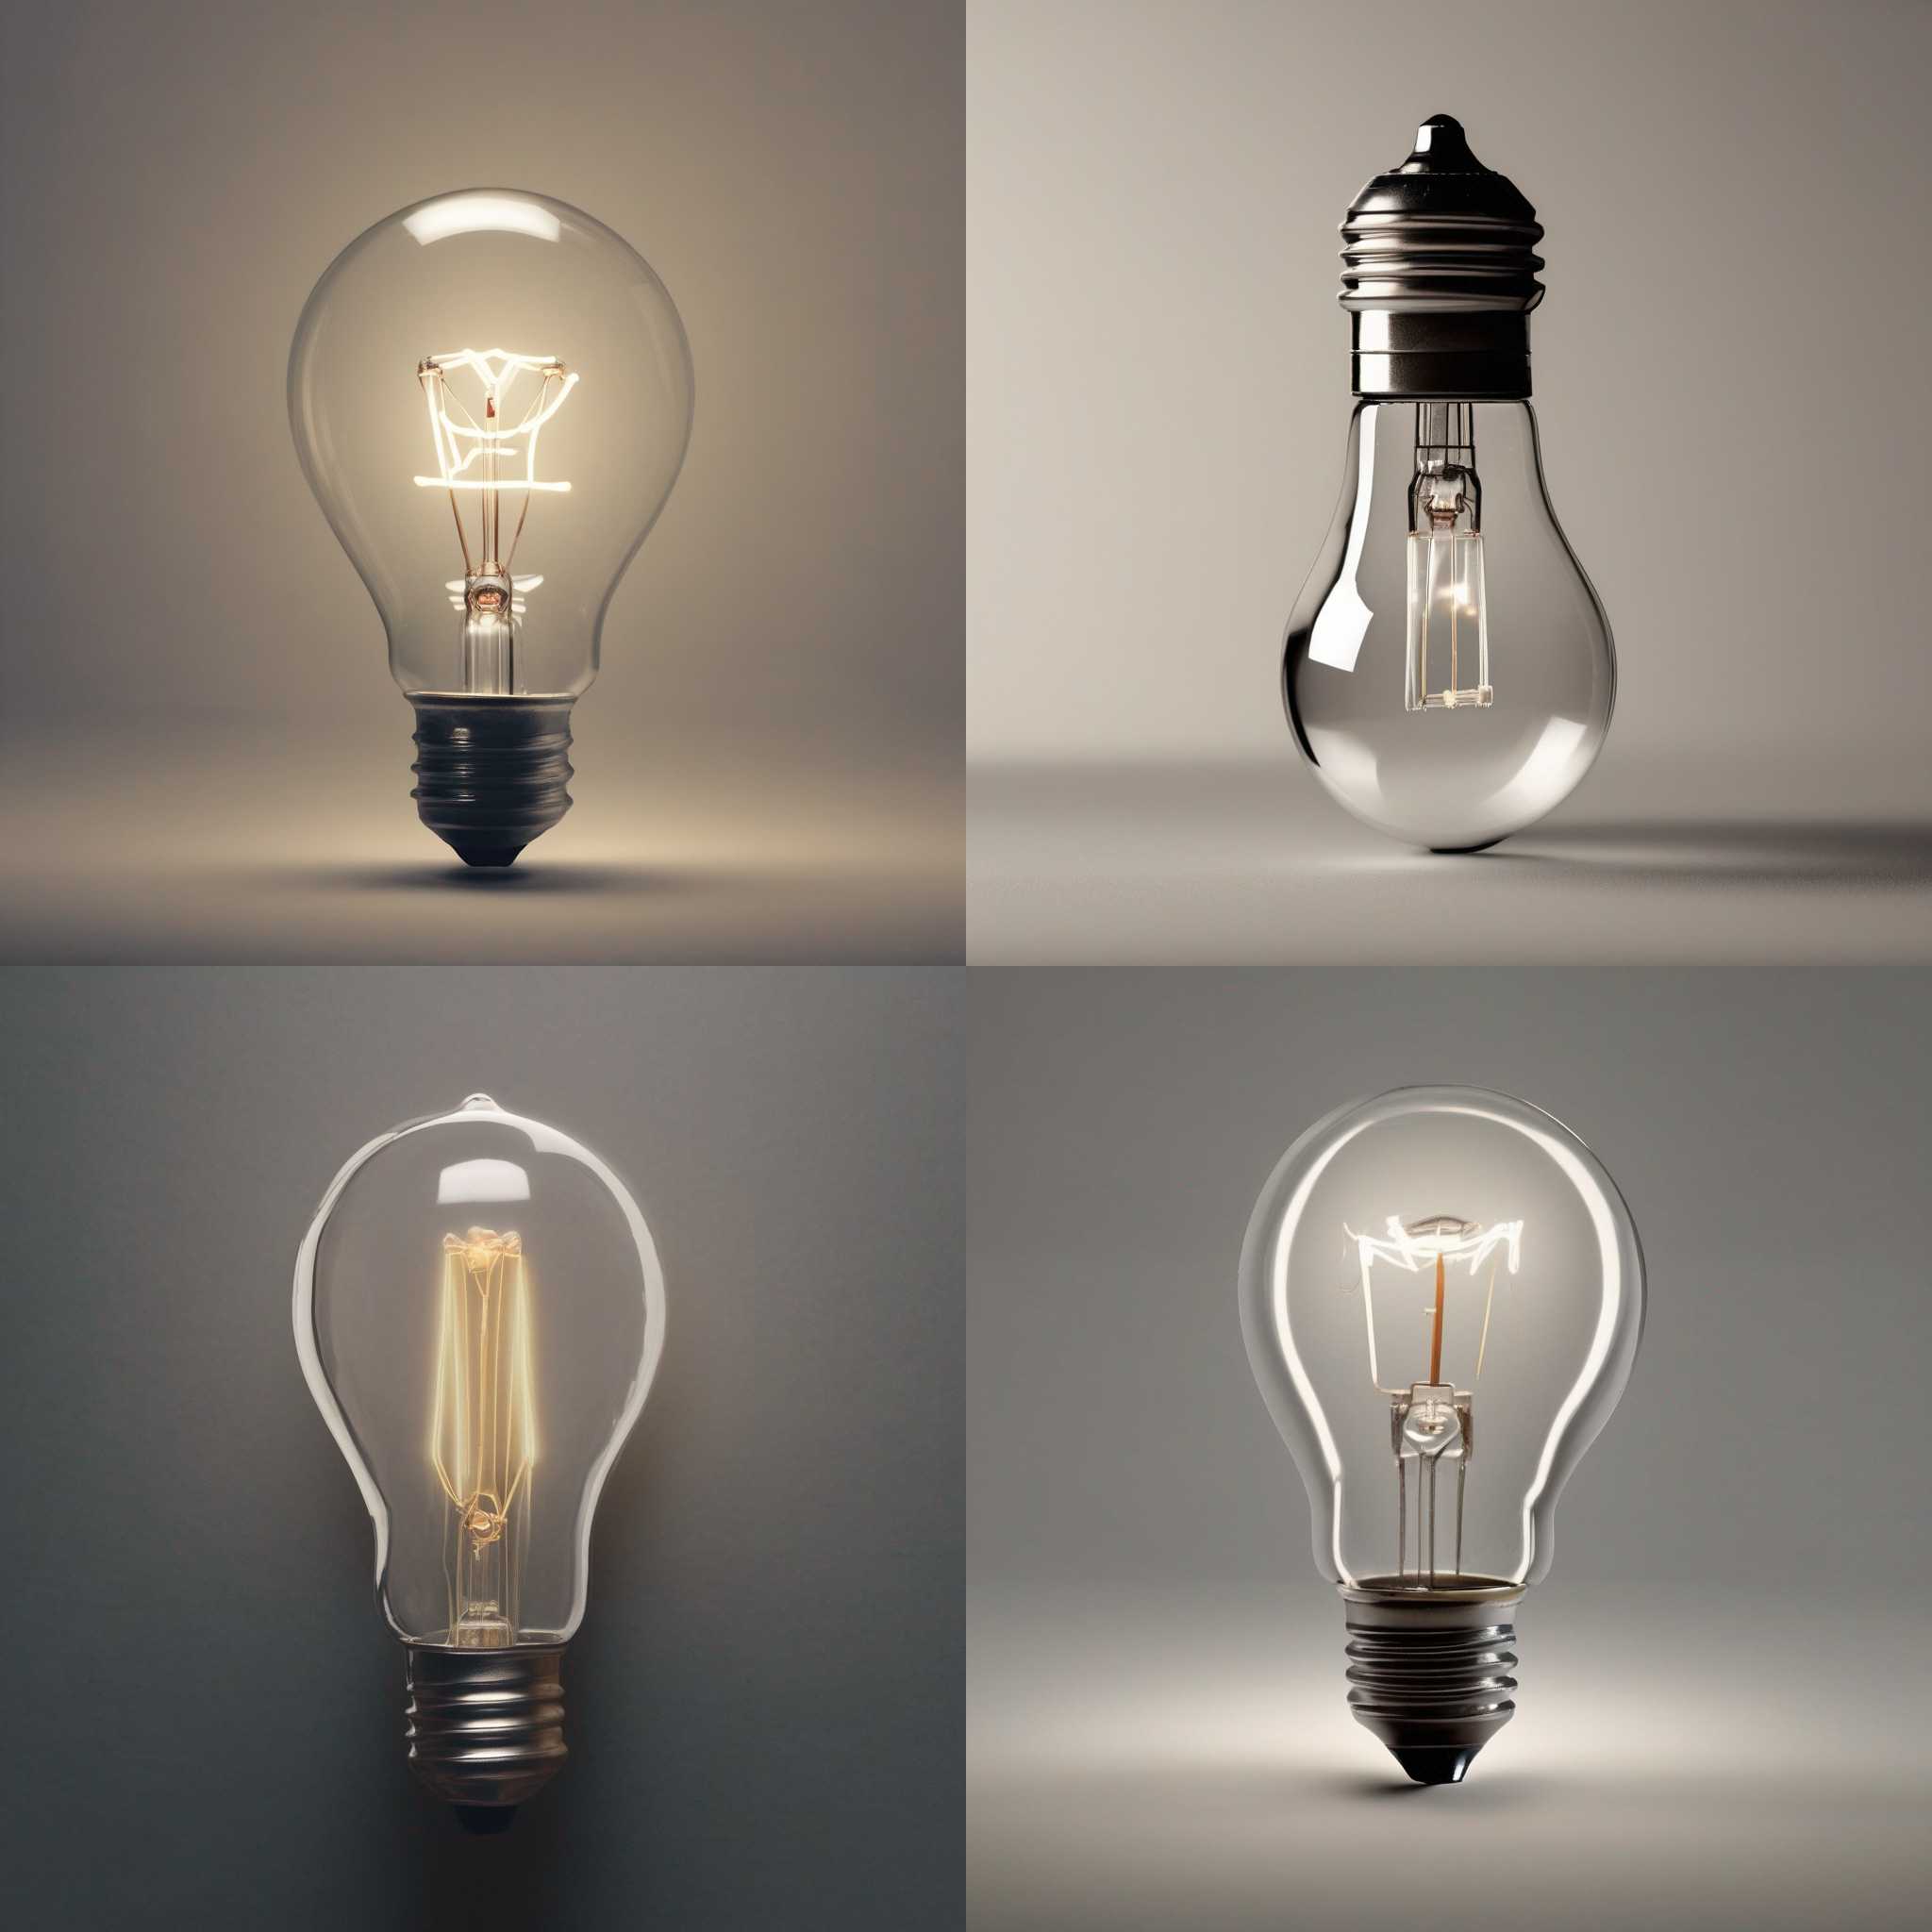 A lightbulb without electricity